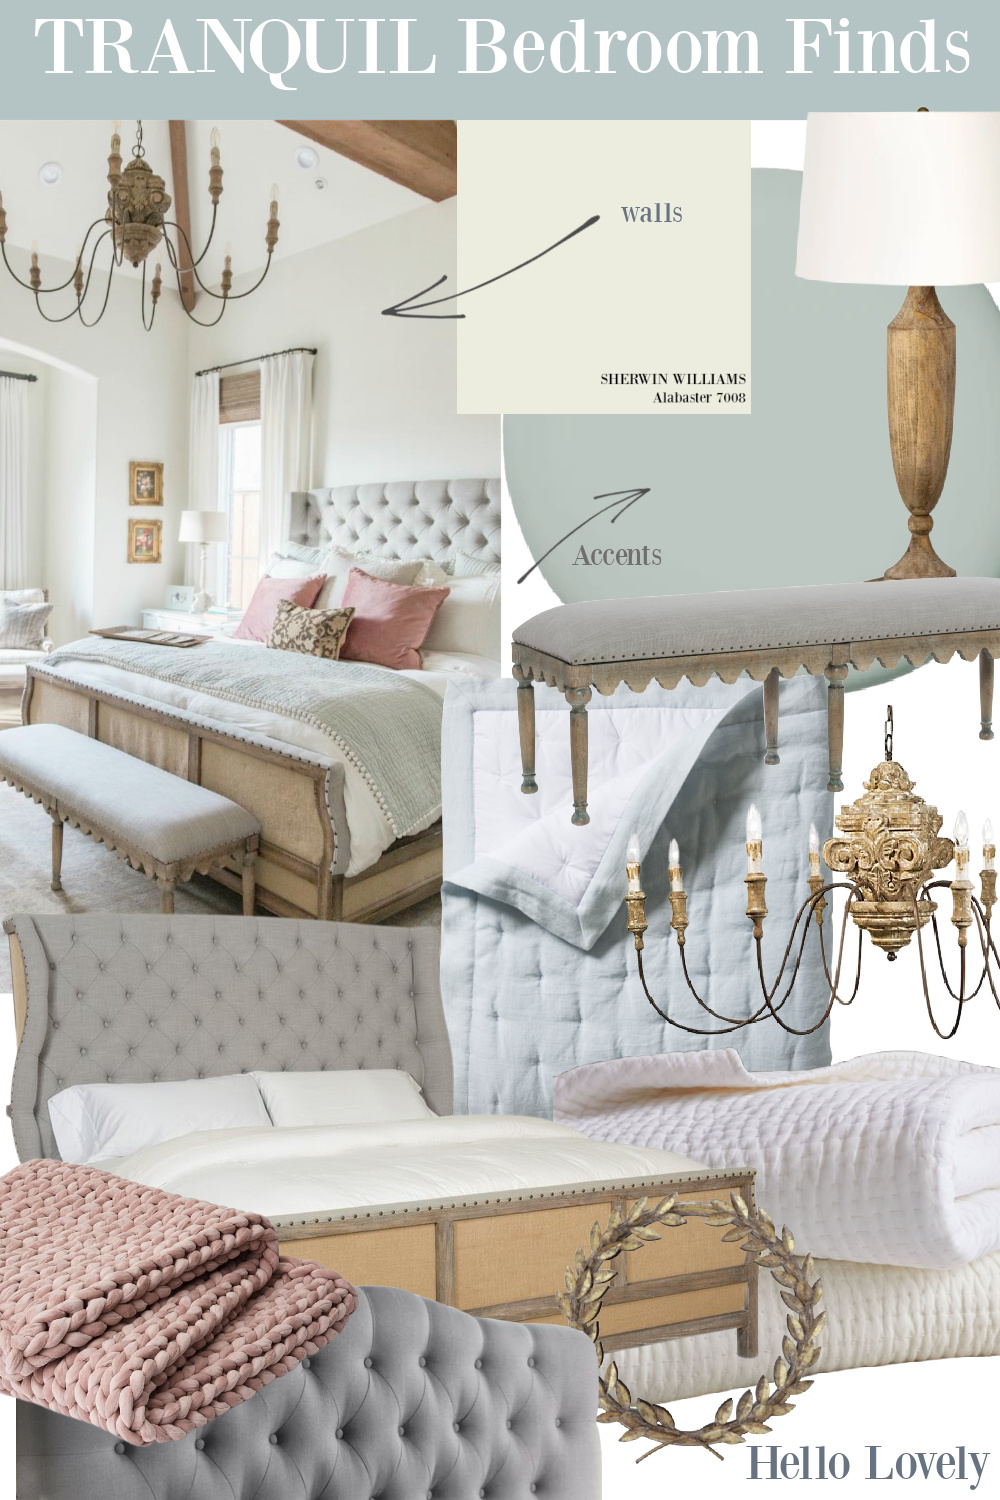 Tranquil bedroom finds - furniture and decor ideas to get the look on Hello Lovely Studio. #paintcolors #bedroomdecor #tranquilbedrooms